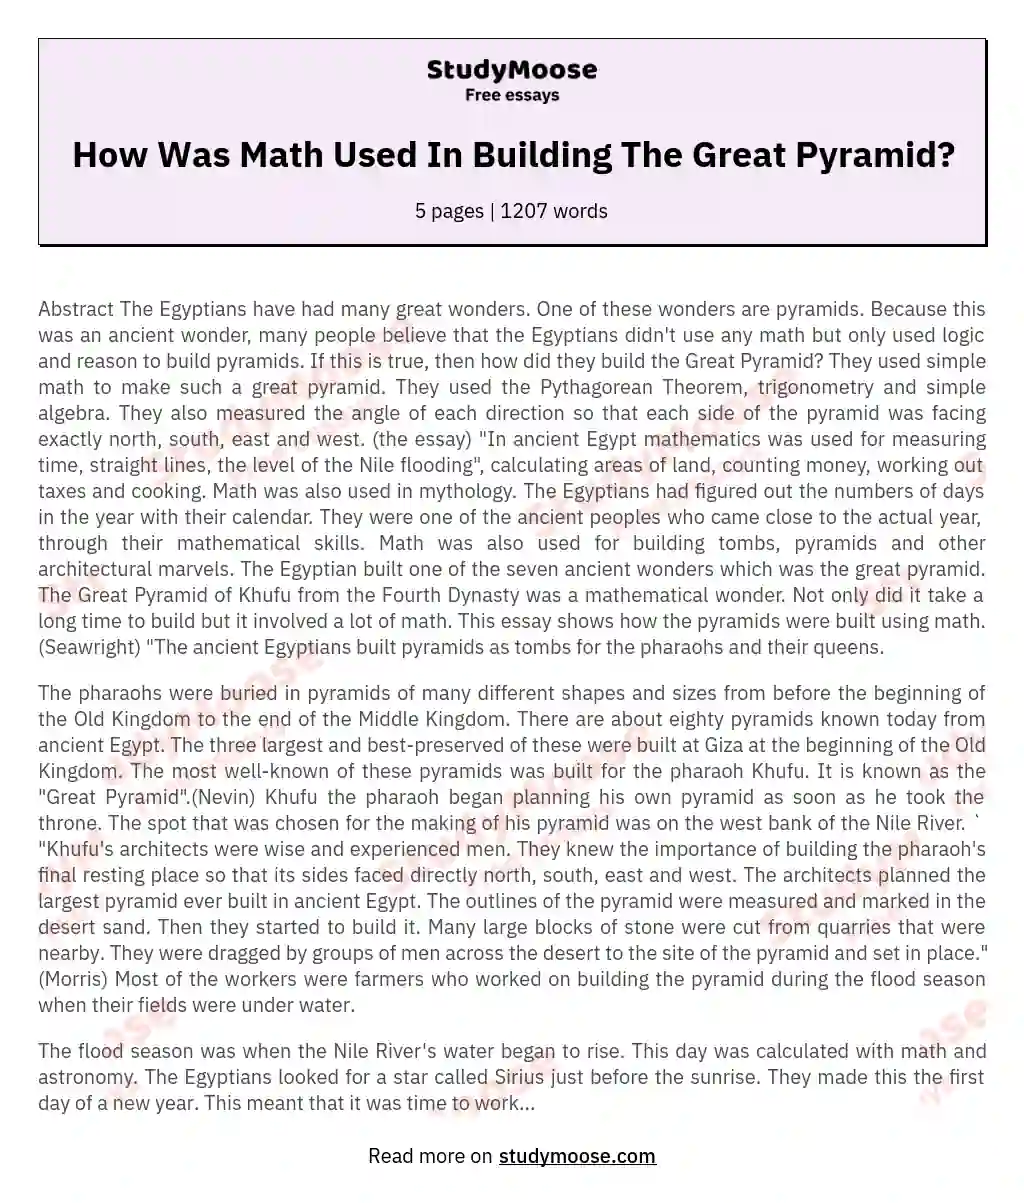 How Was Math Used In Building The Great Pyramid? essay